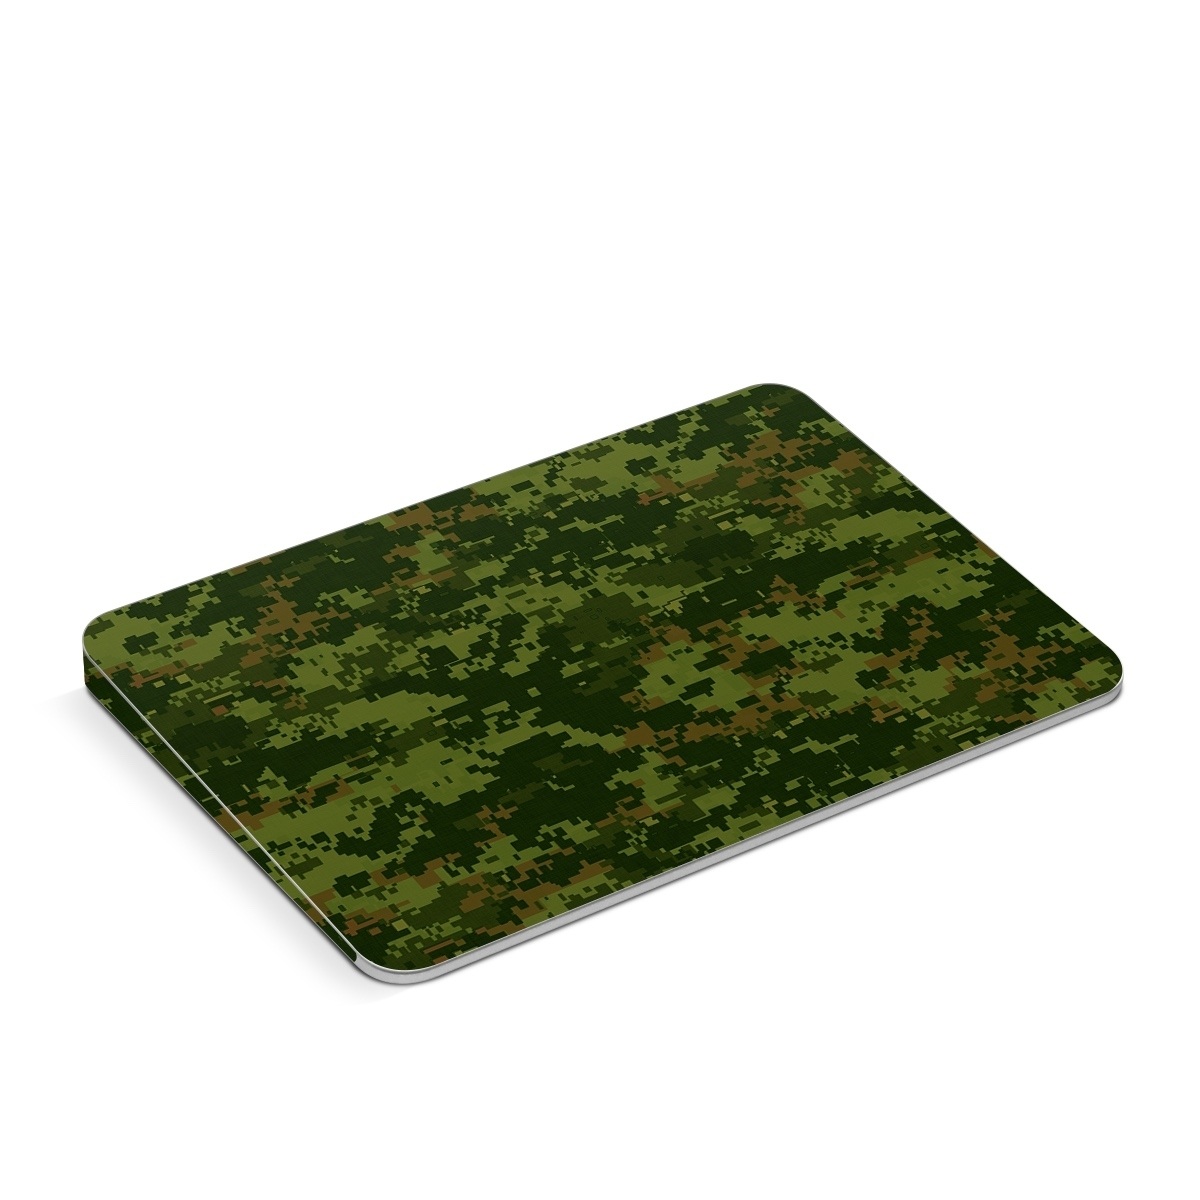 Apple Magic Trackpad Skin design of Military camouflage, Green, Pattern, Uniform, Camouflage, Clothing, Design, Leaf, Plant, with green, brown colors